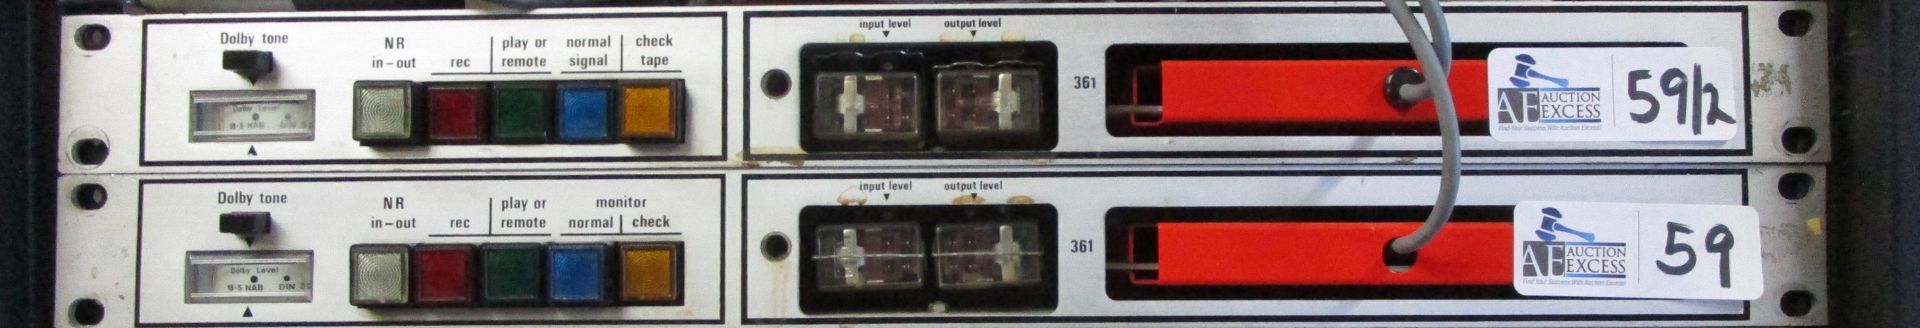 LOT OF 2 DOLBY NOISE REDUCTION MUDULES